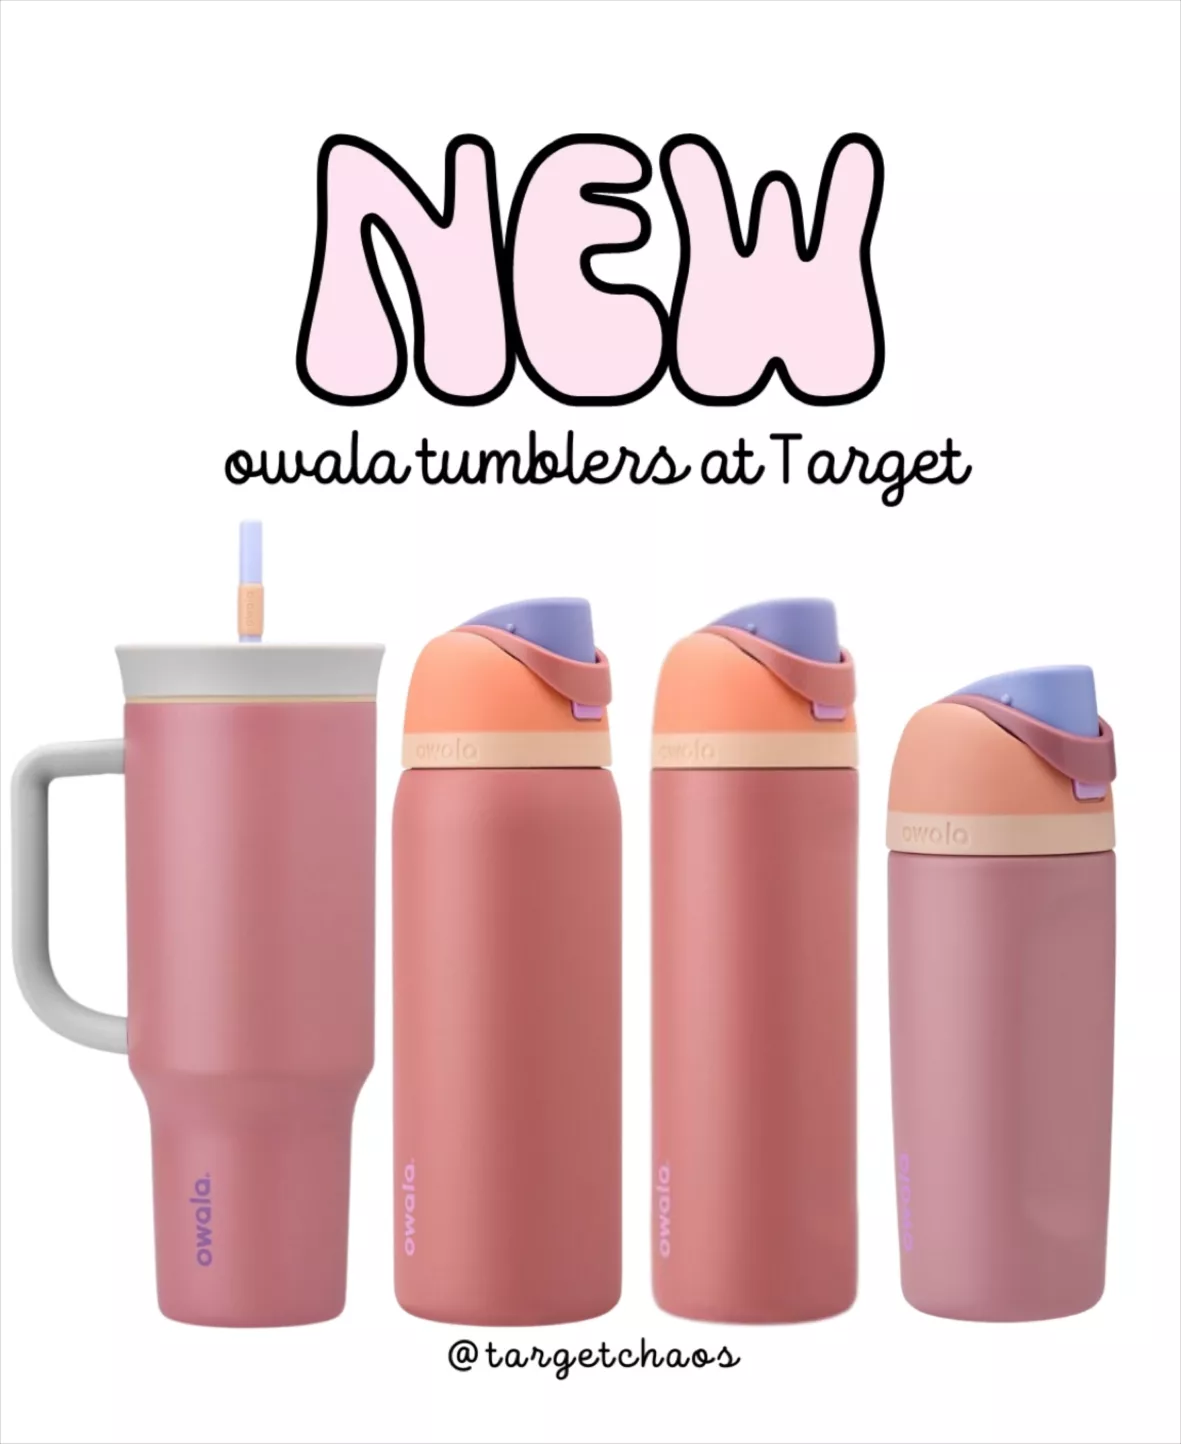 Owala 40 oz stainless steel tumbler with handle. Pink taupe.